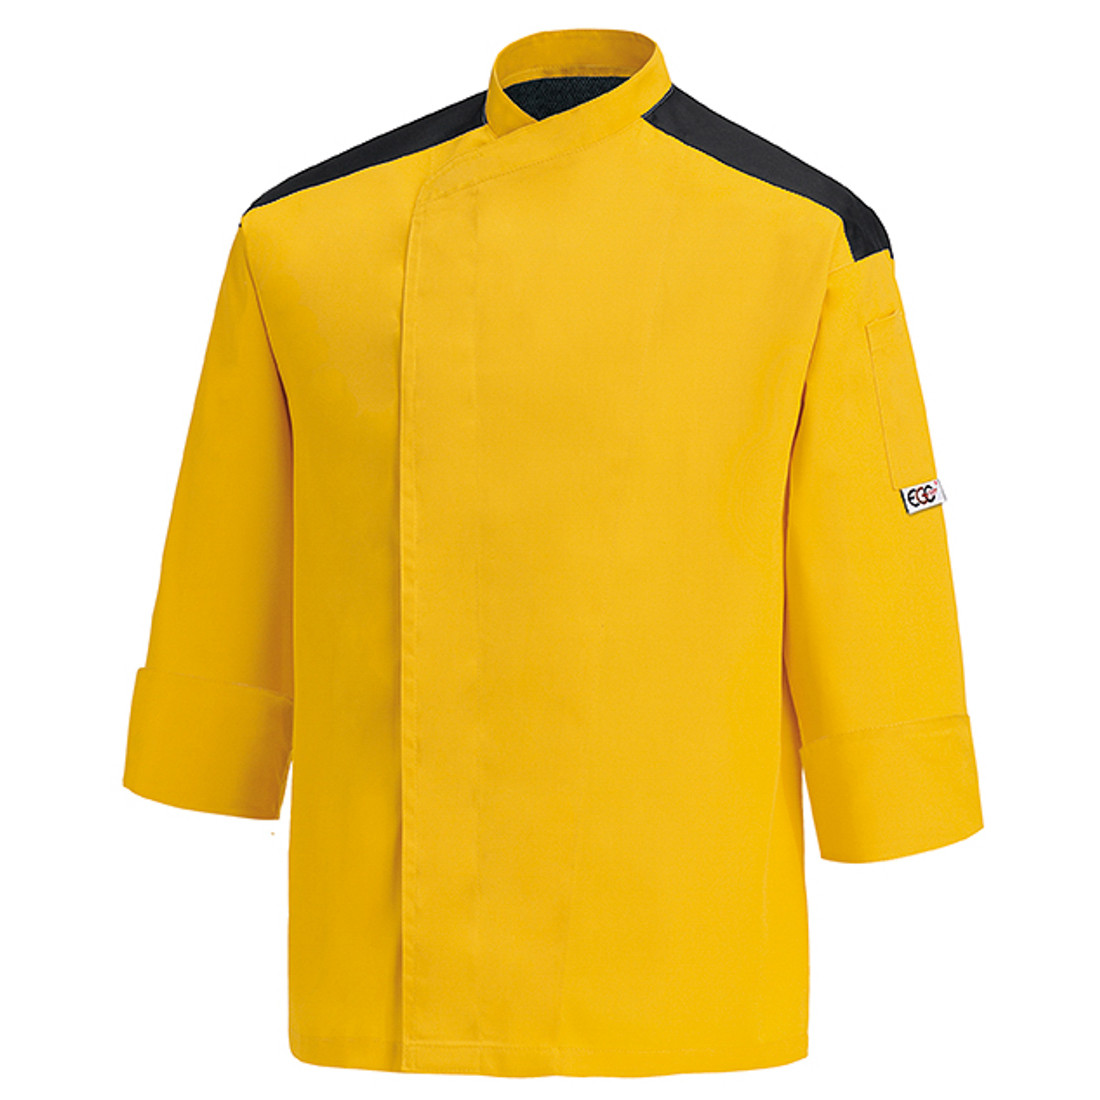 First Chef's Jacket, 65% poliester/35% bumbac - Safetywear